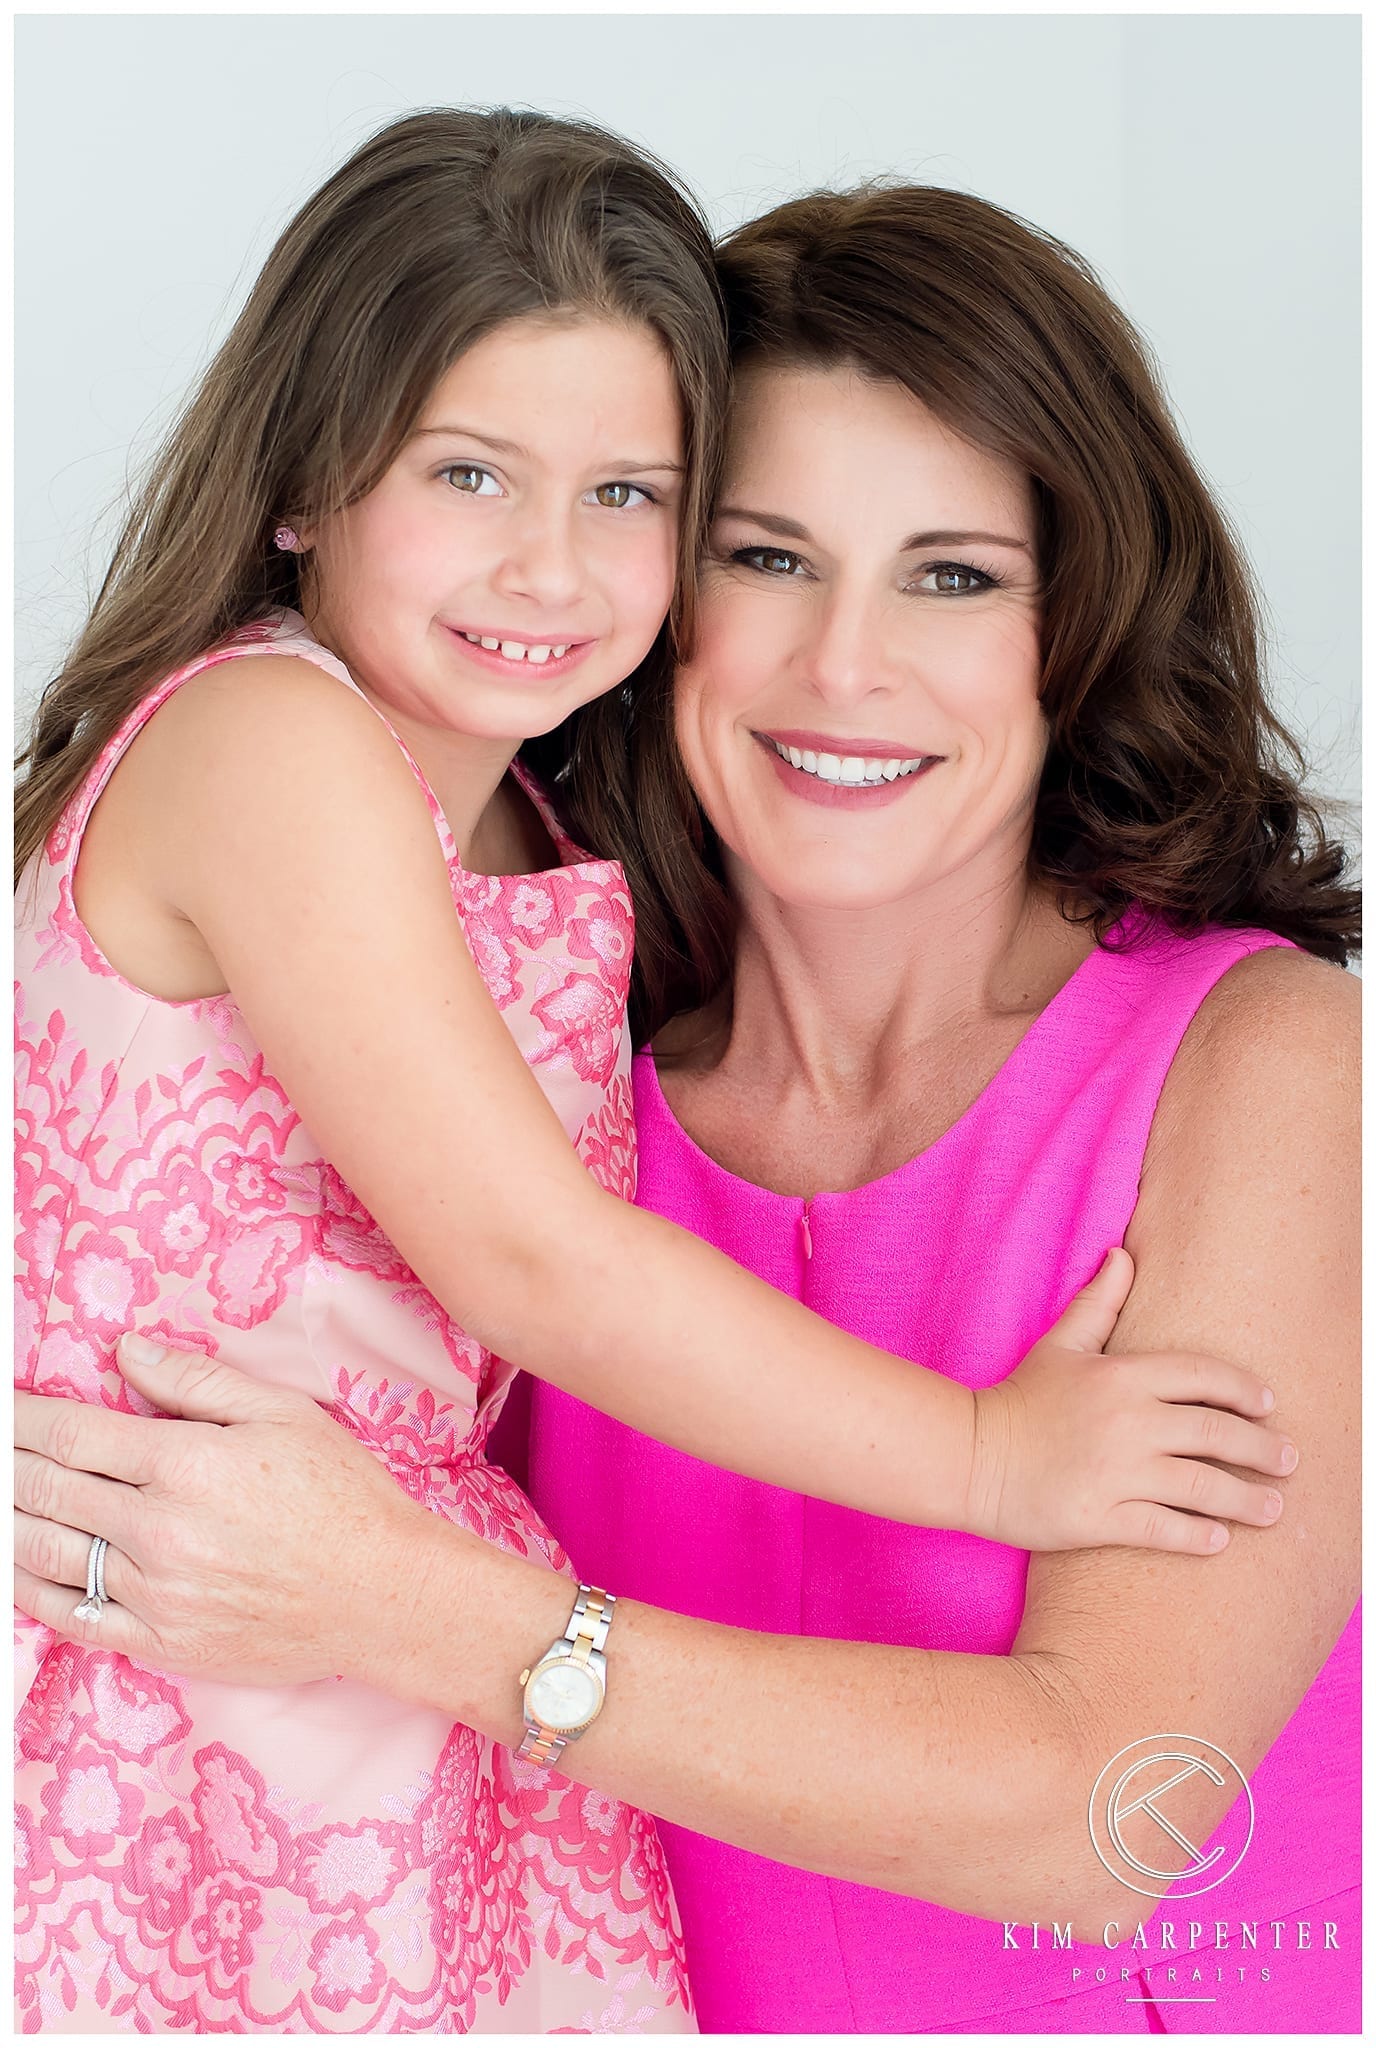 Lakeland Photographer - Portrait of a Mother and Daughter